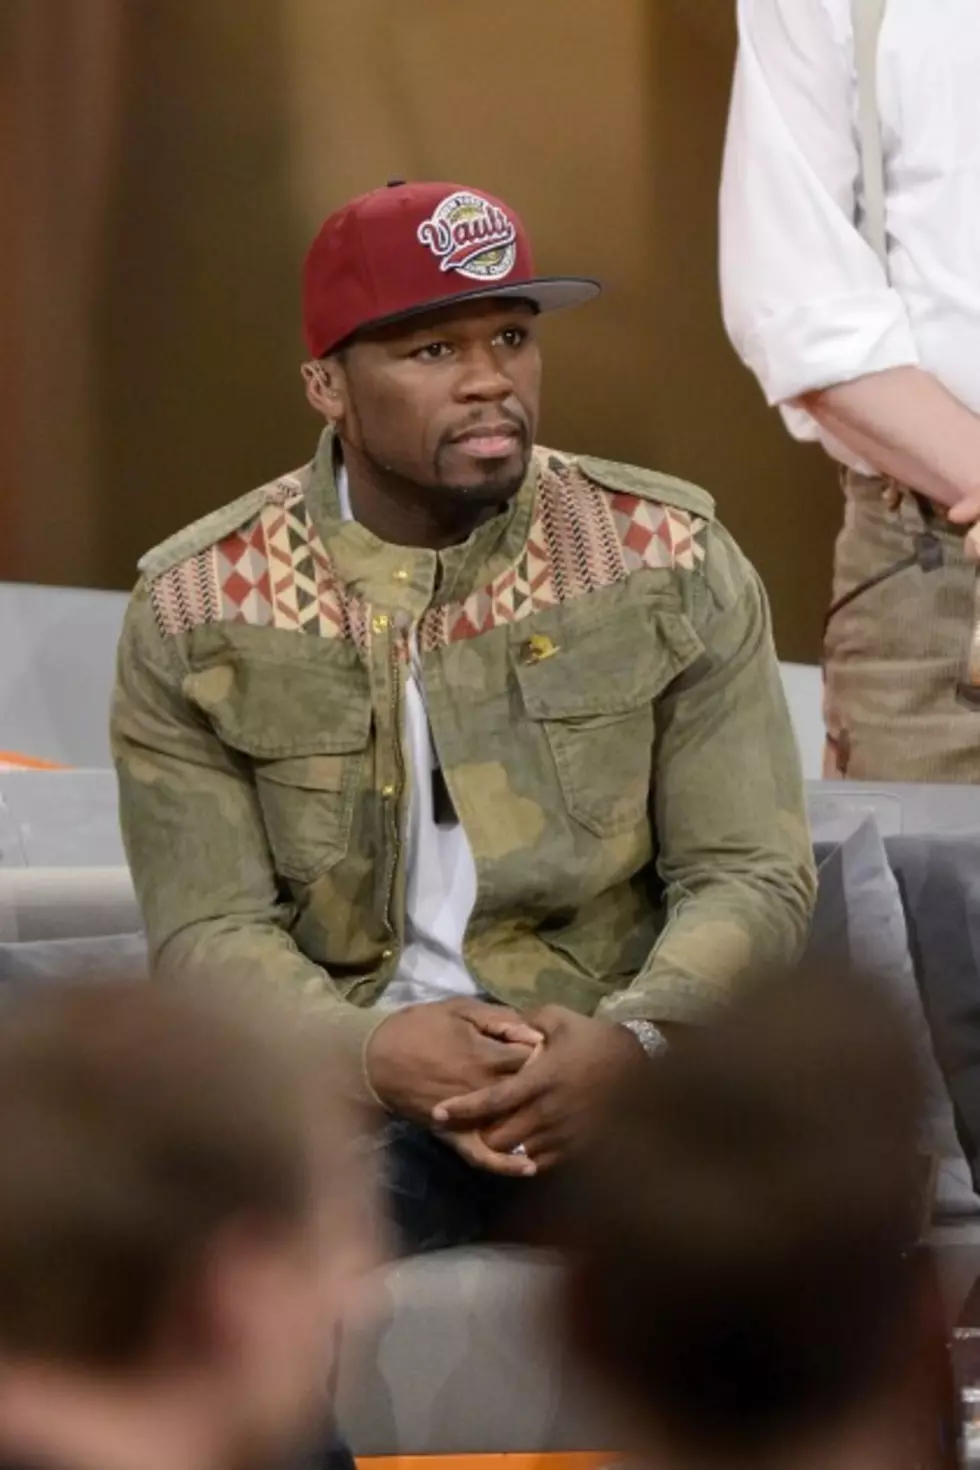 50 Cent Hooks Up With Kendrick Lamar To Claim The Charts [NSFW VIDEO]